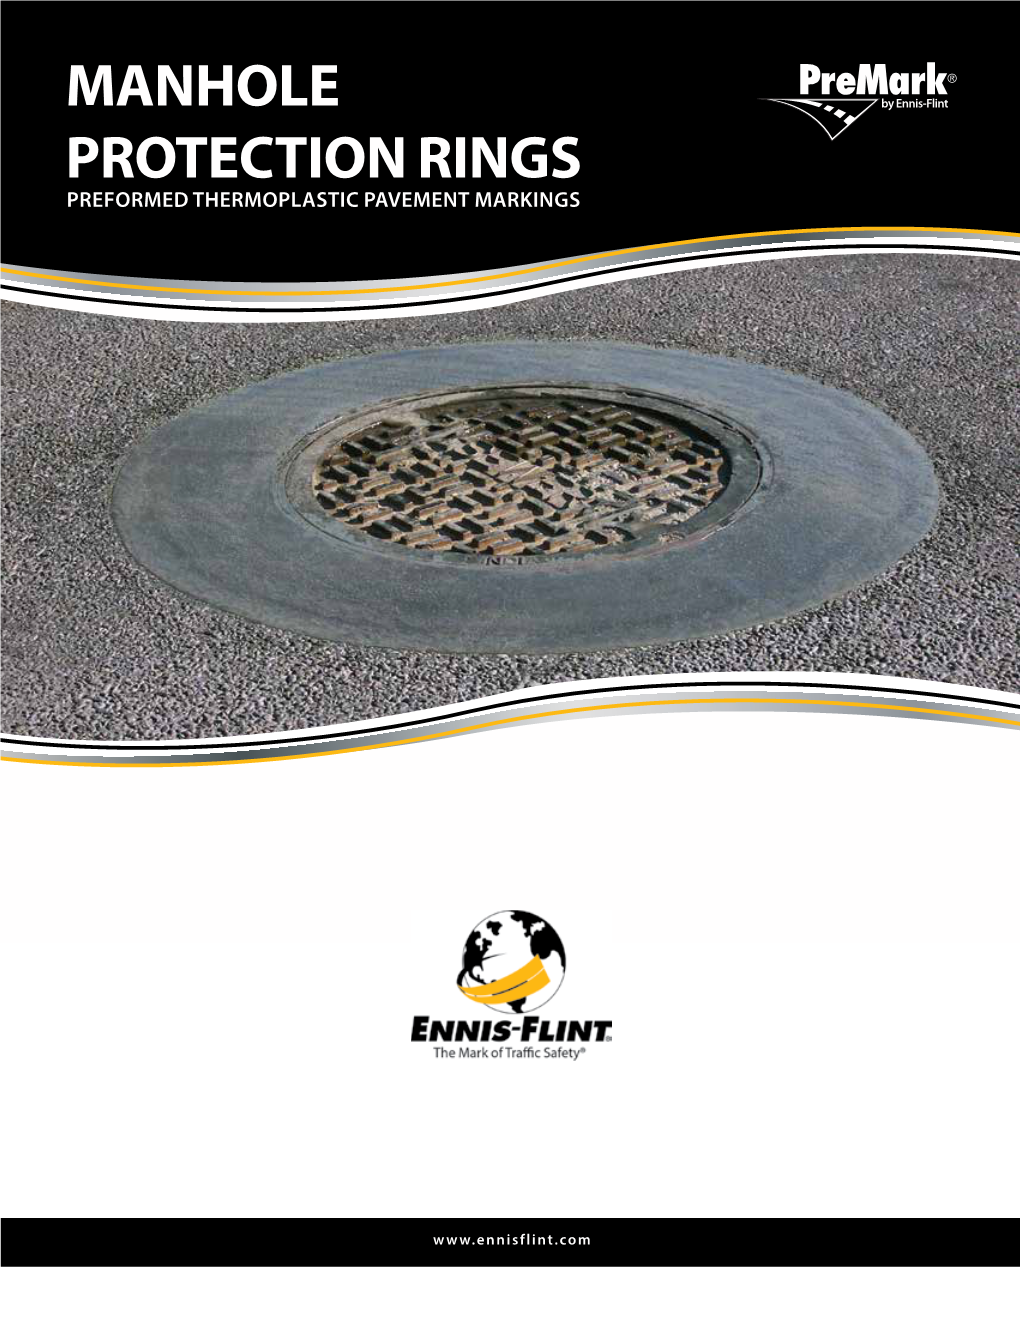 Manhole Protection Rings Preformed Thermoplastic Pavement Markings